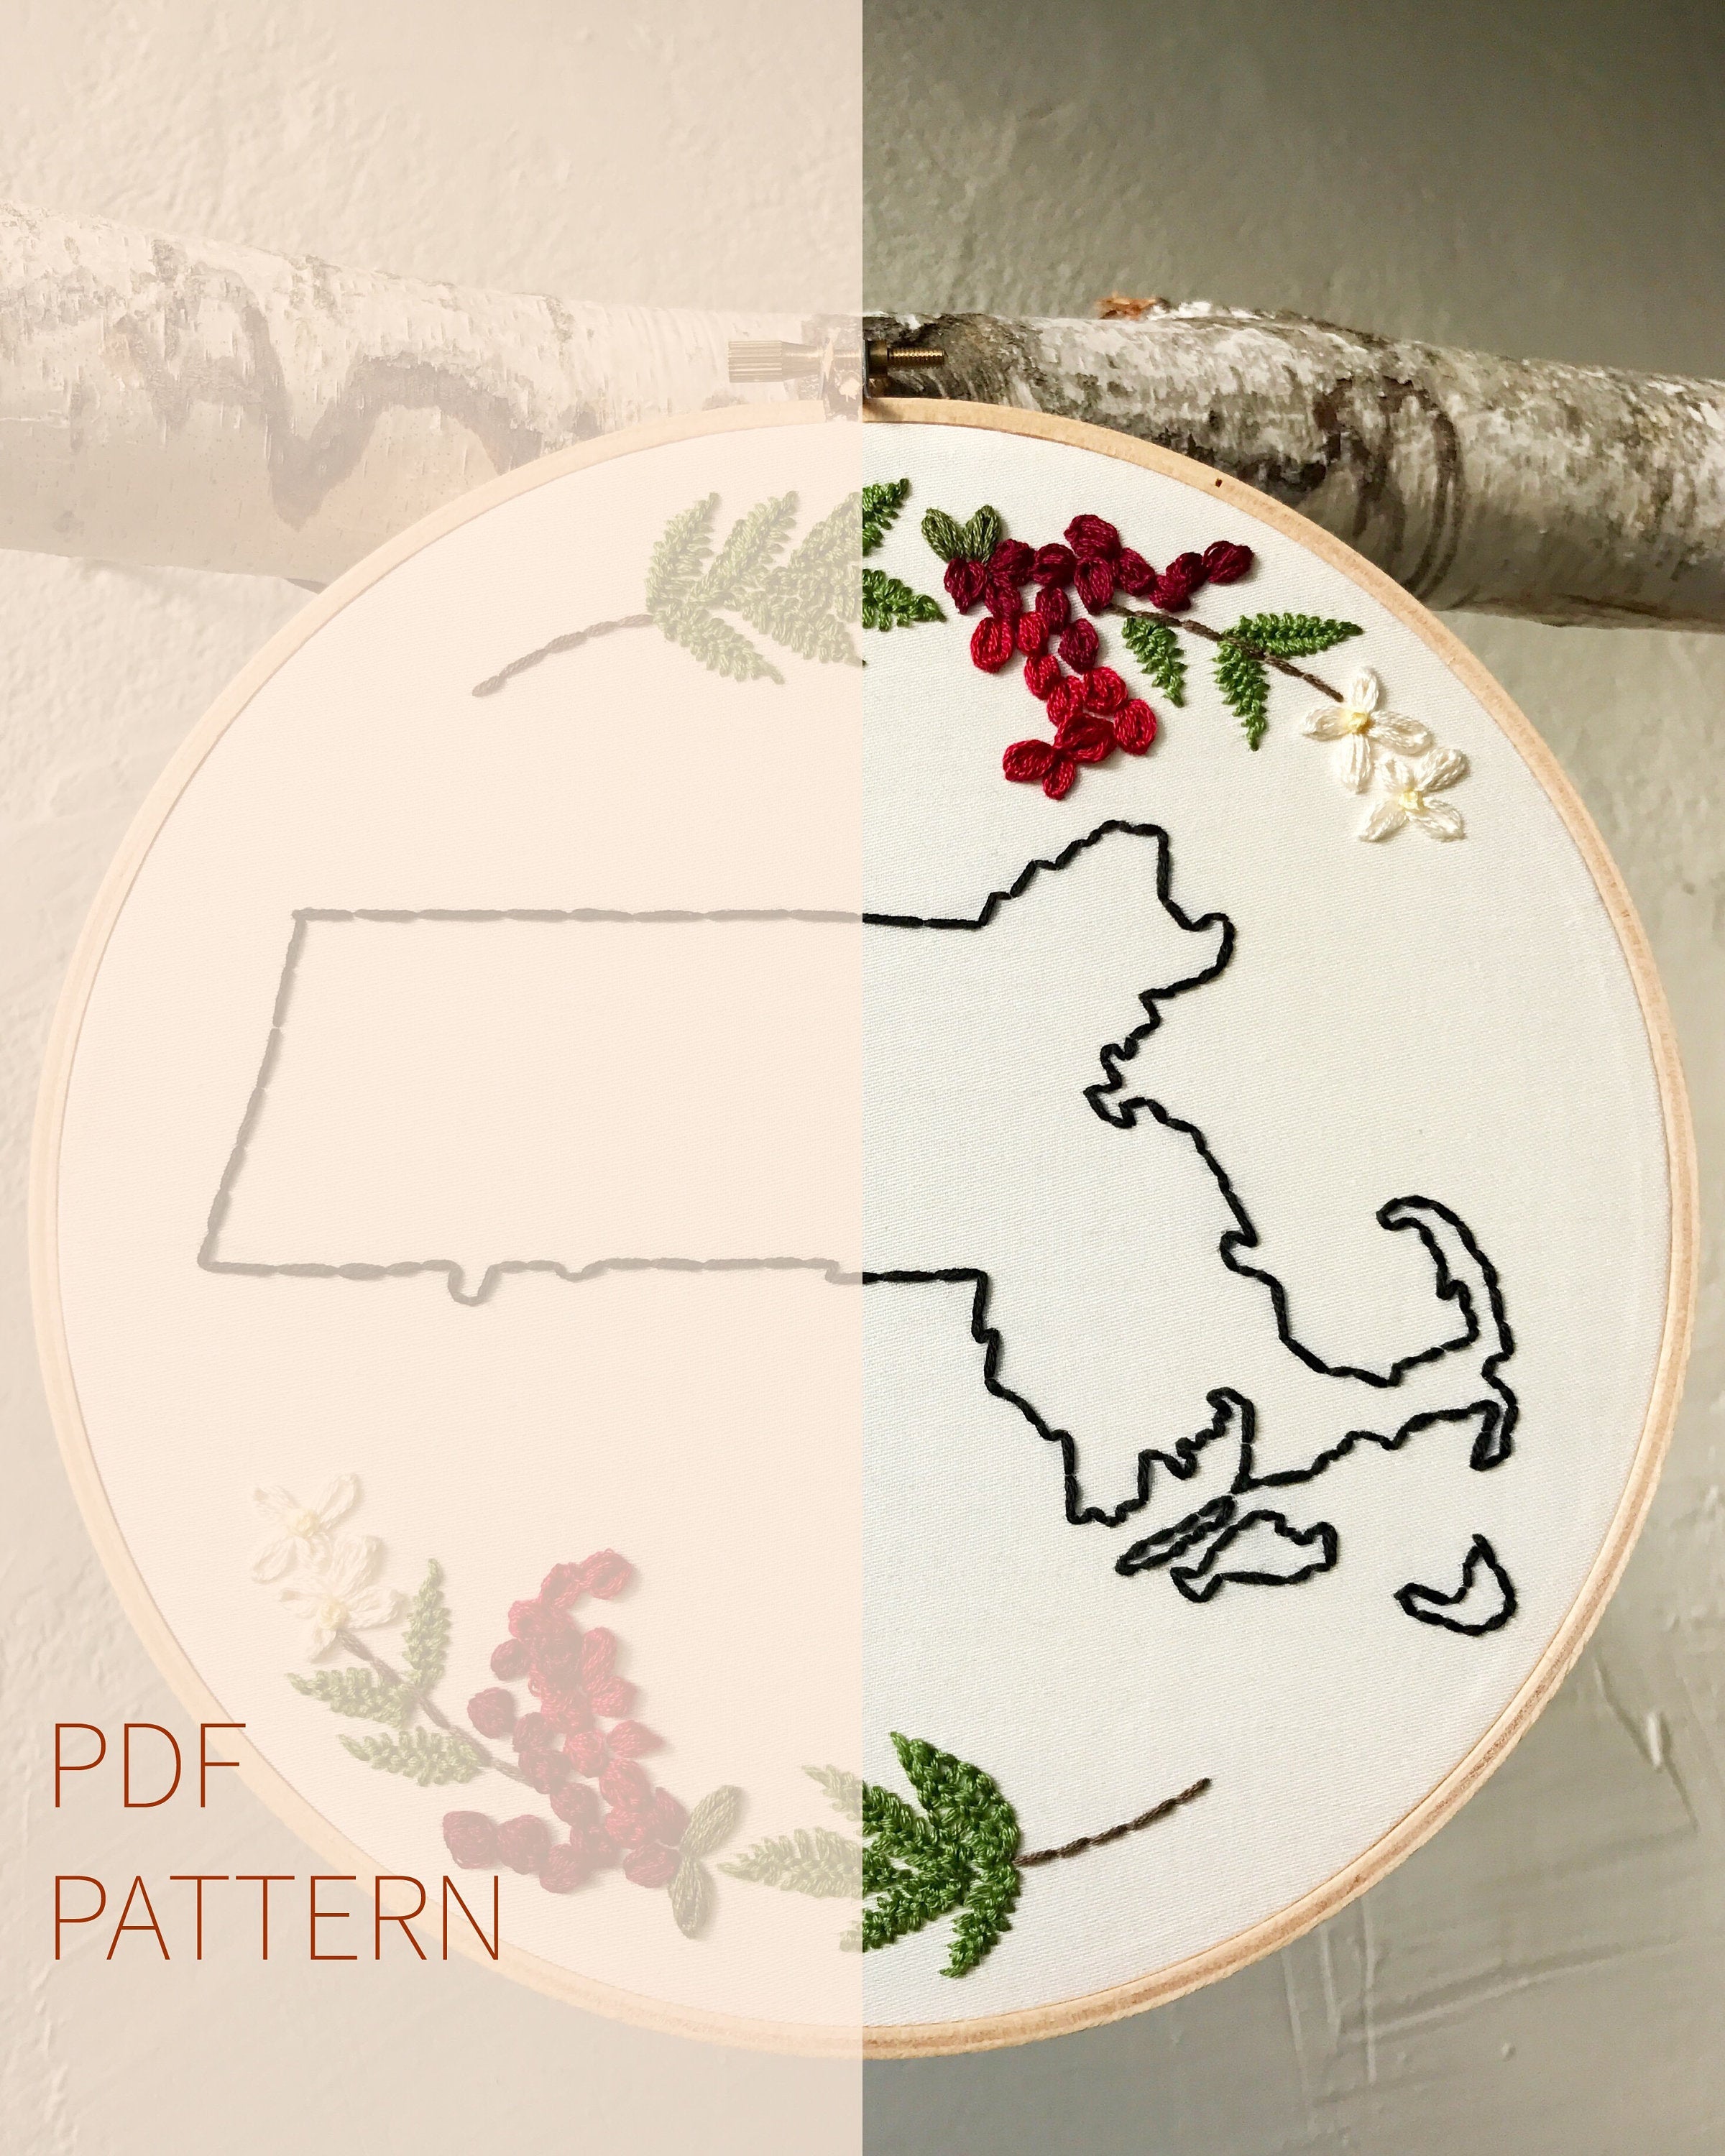 PDF PATTERN Massachusetts State Outline Embroidery Design